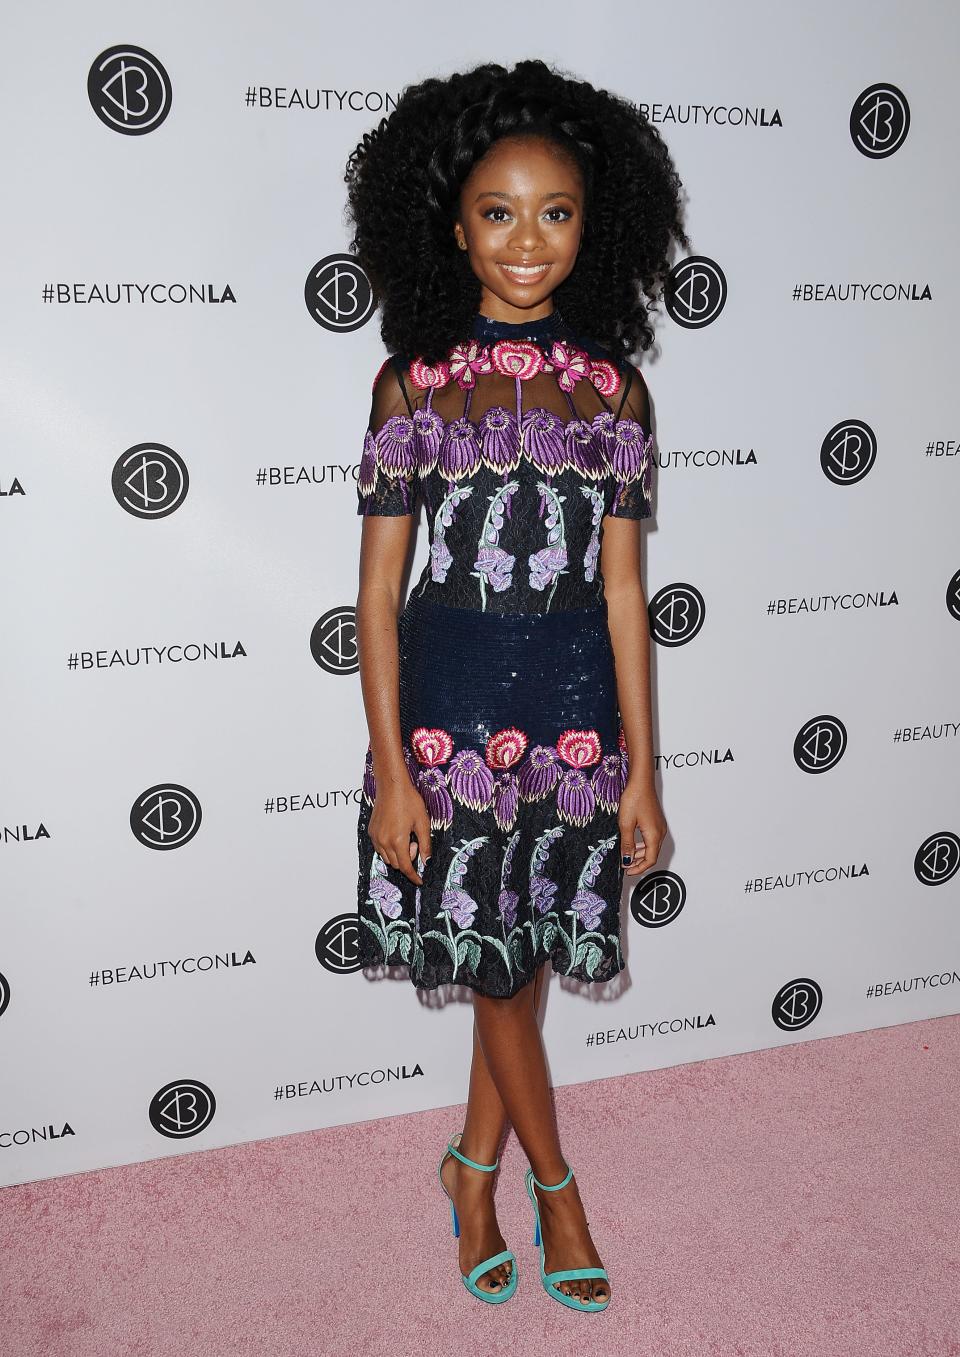 WHO: Skai Jackson WHAT: Temperley WHERE: At the 5th Annual Beautycon Festival, Los Angeles WHEN: August 13, 2017